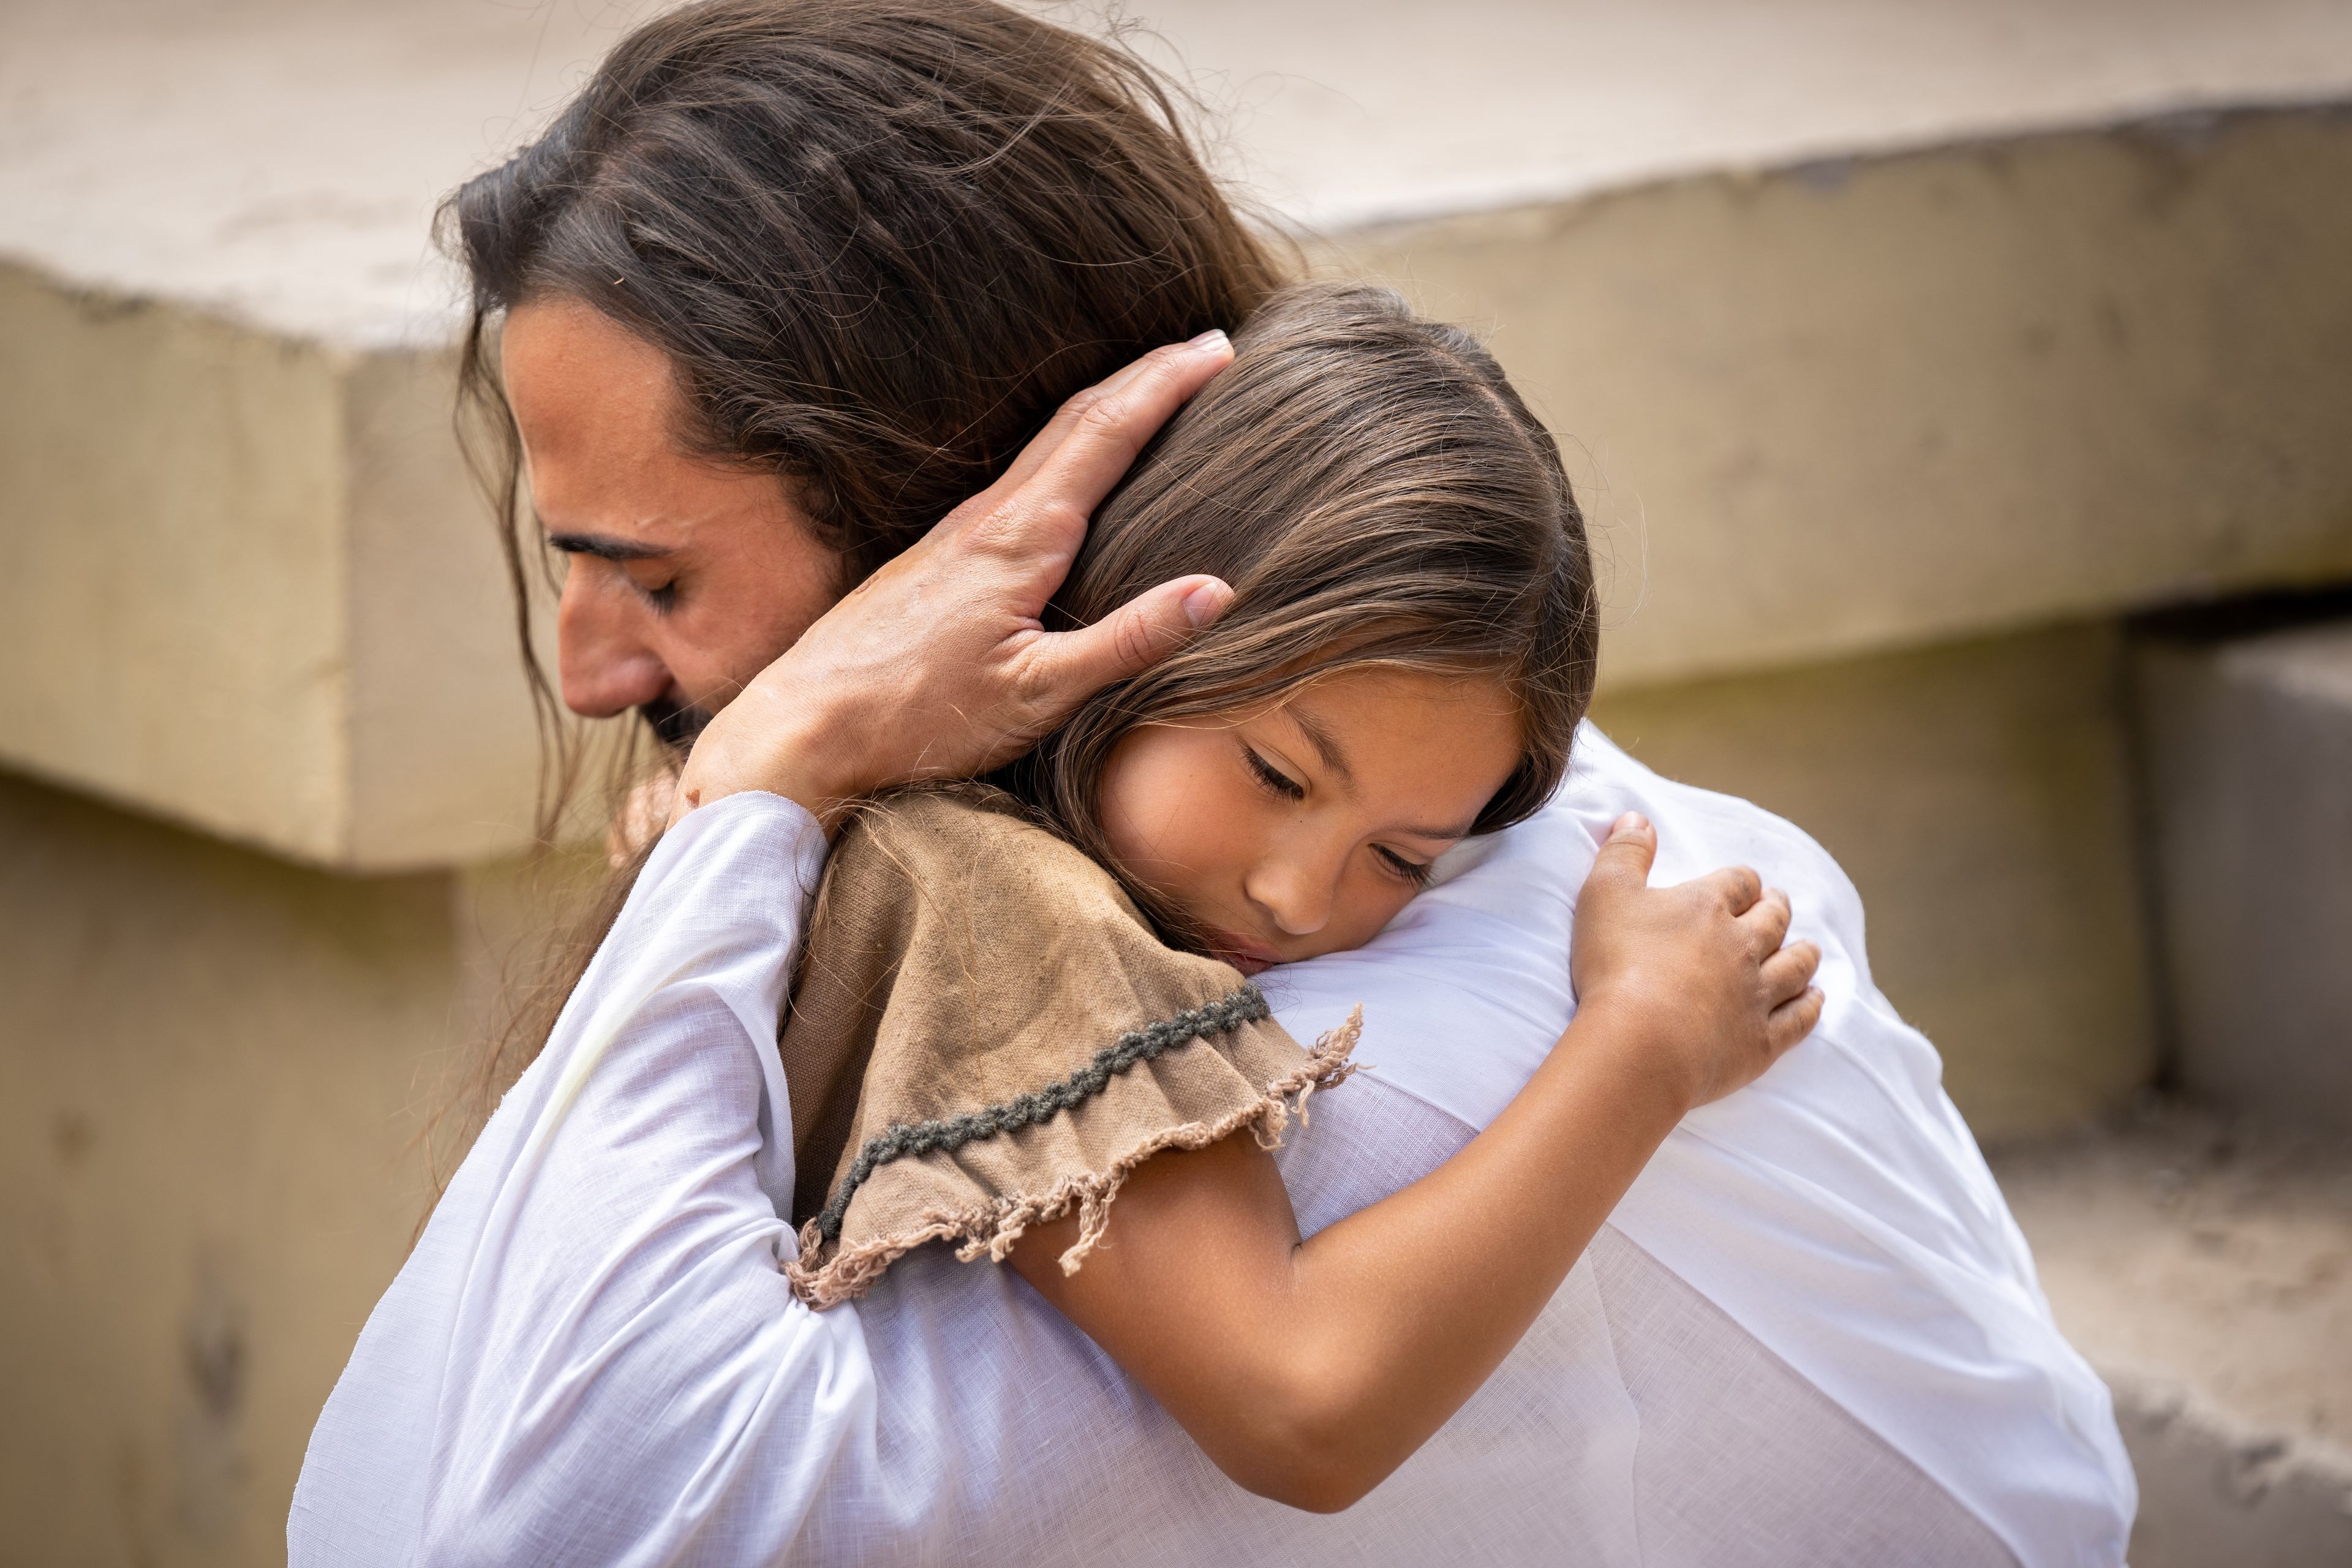 An actor portraying Jesus Christ embraces a young Nephite girl outside.